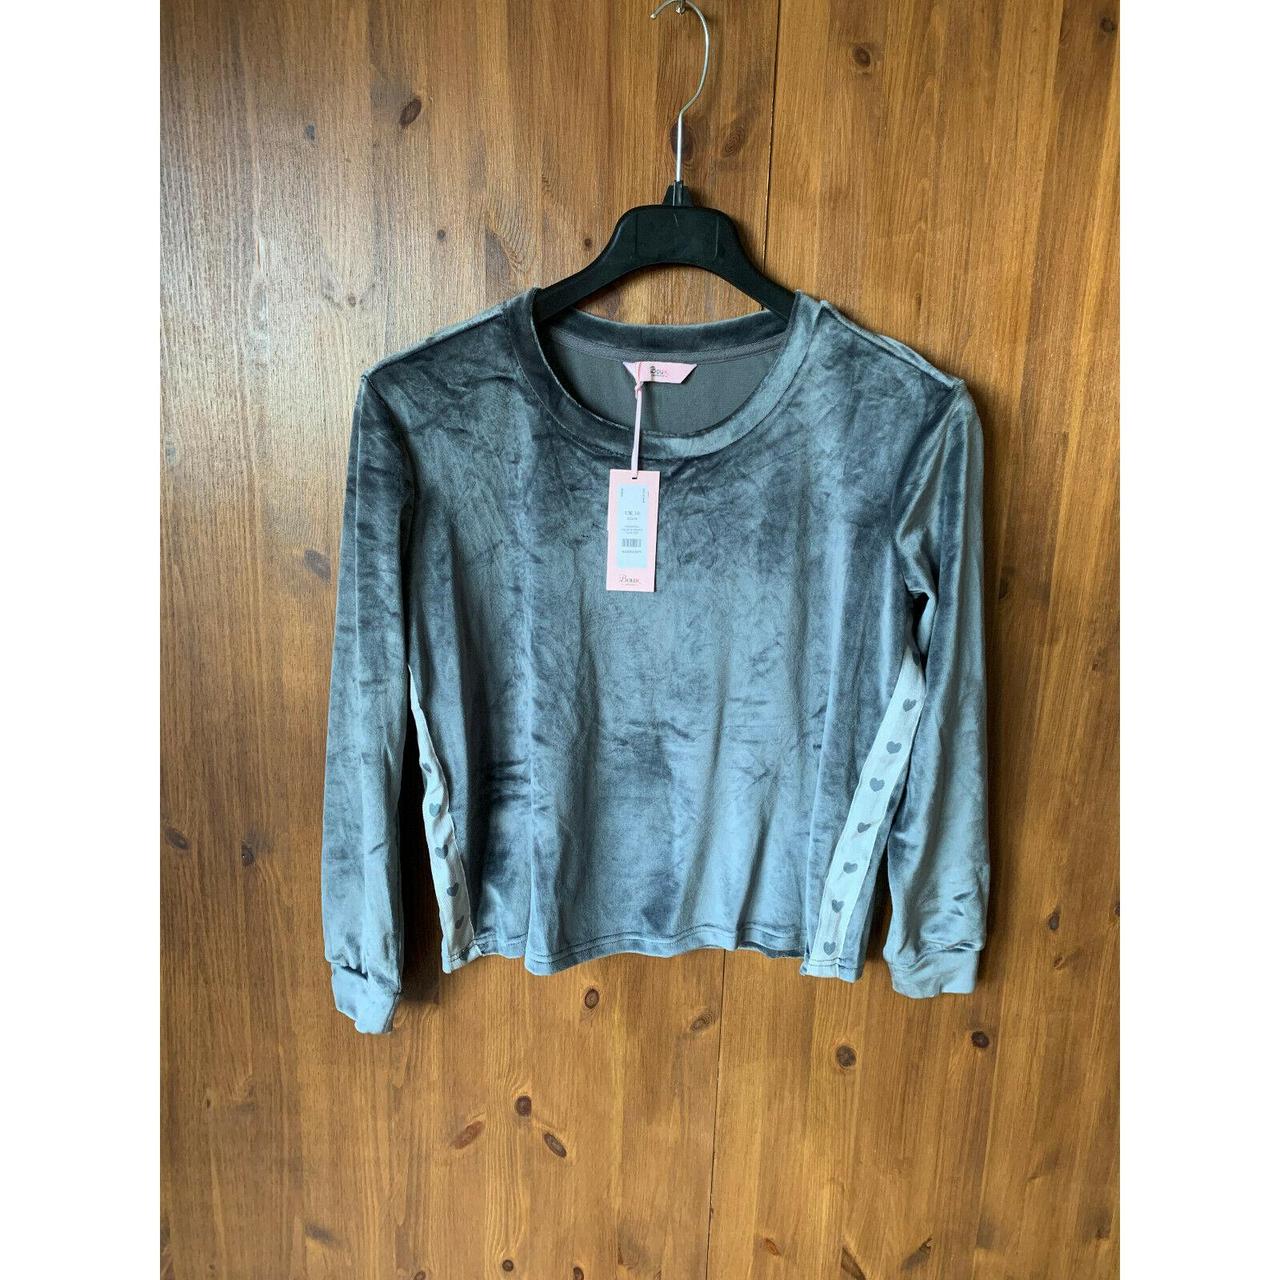 Product Image 1 - BNWT - RRP £27 -